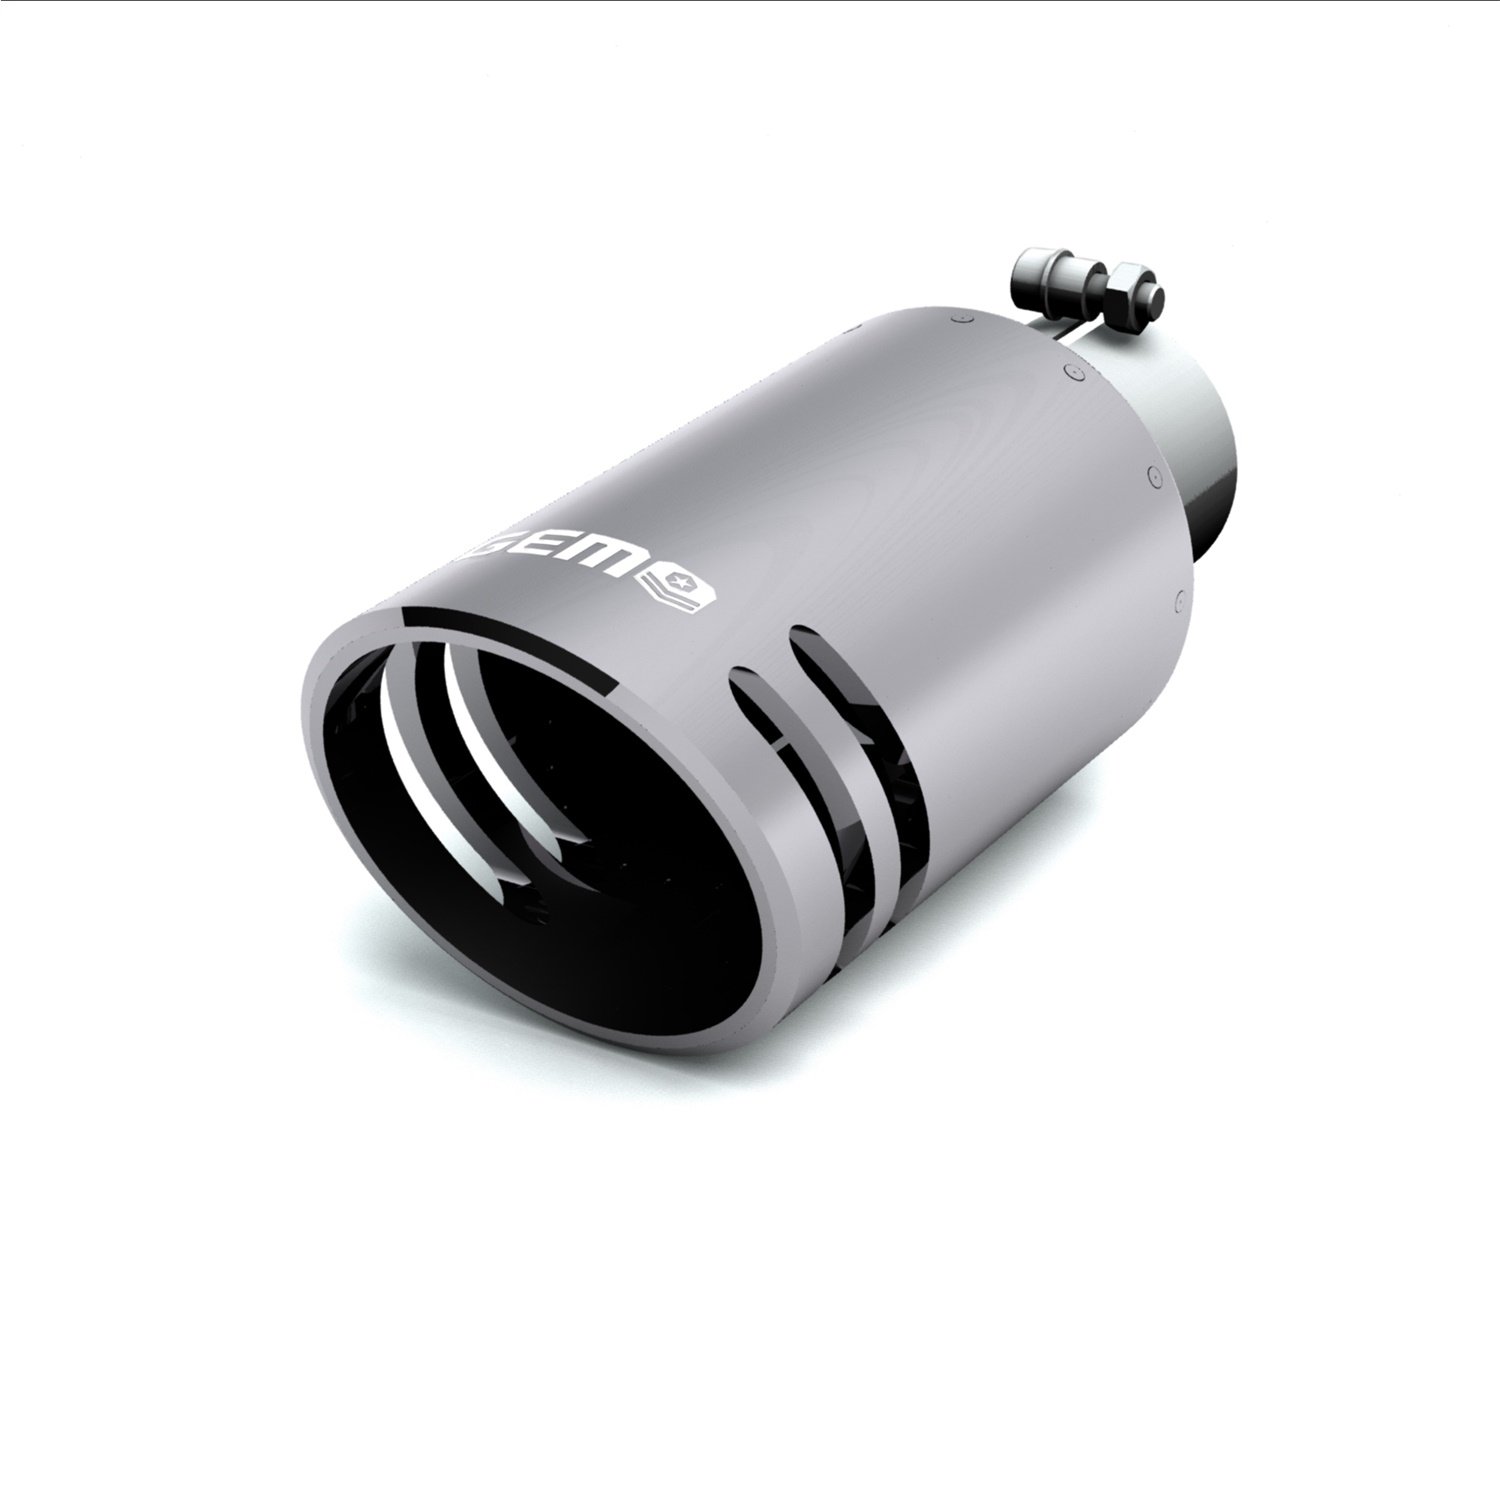 GEM Billet Exhaust Tip, 2.75 in. Inlet/5 in. Outlet x 12 in. Length, Aluminum/304 Stainless Steel, SILENCER Cut [Chrome Finish]